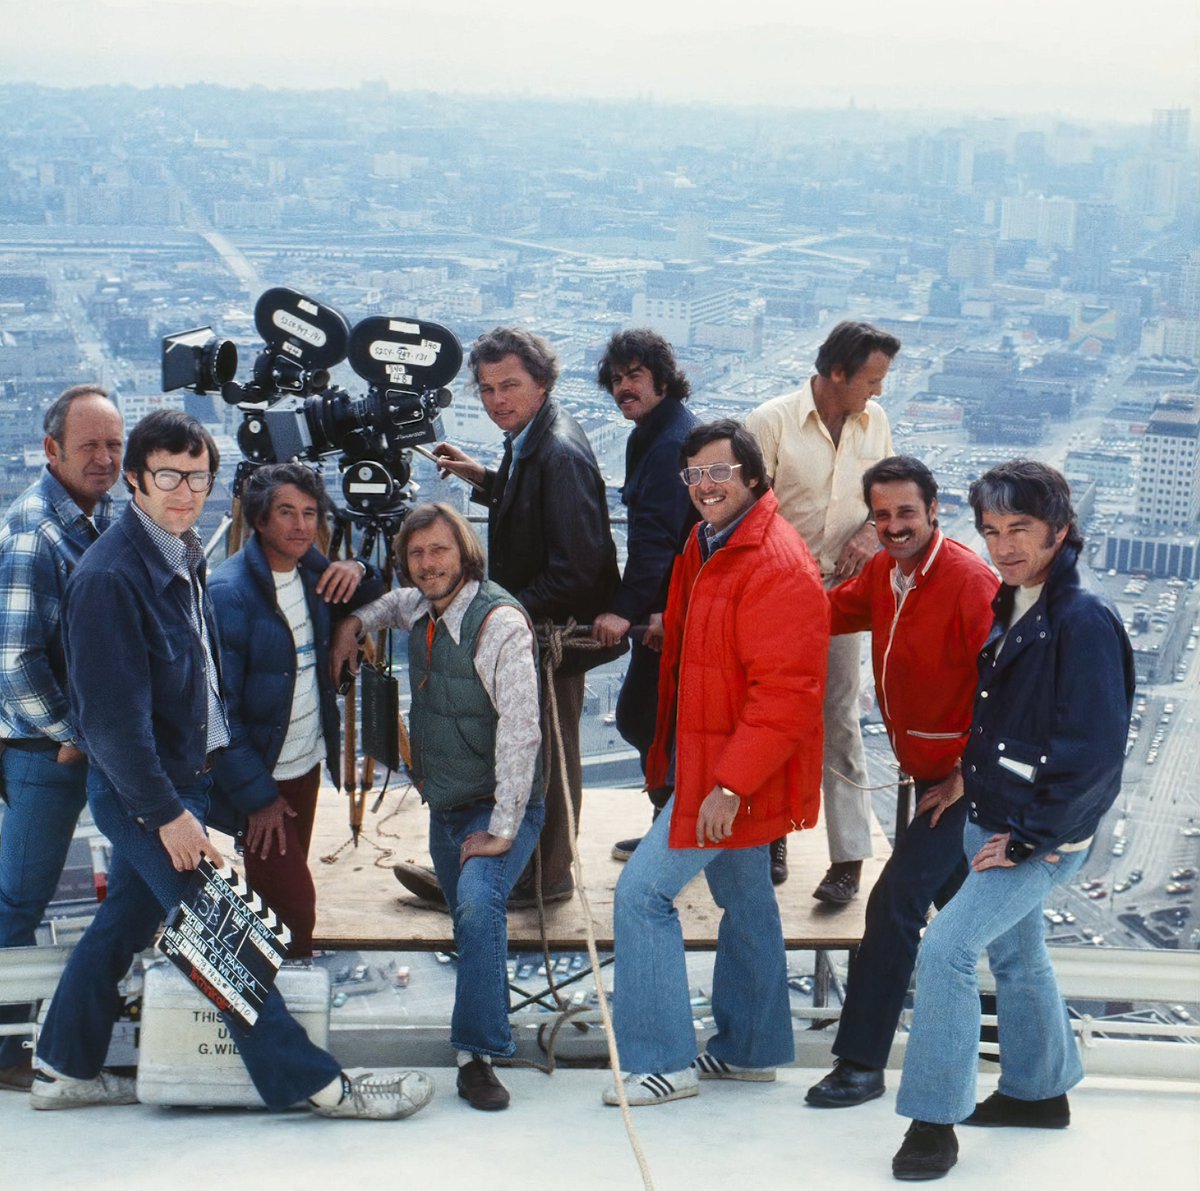 Gordon Willis and his camera crew filming THE PARALLAX VIEW atop the Space Needle in Seattle on April 11, 1973.